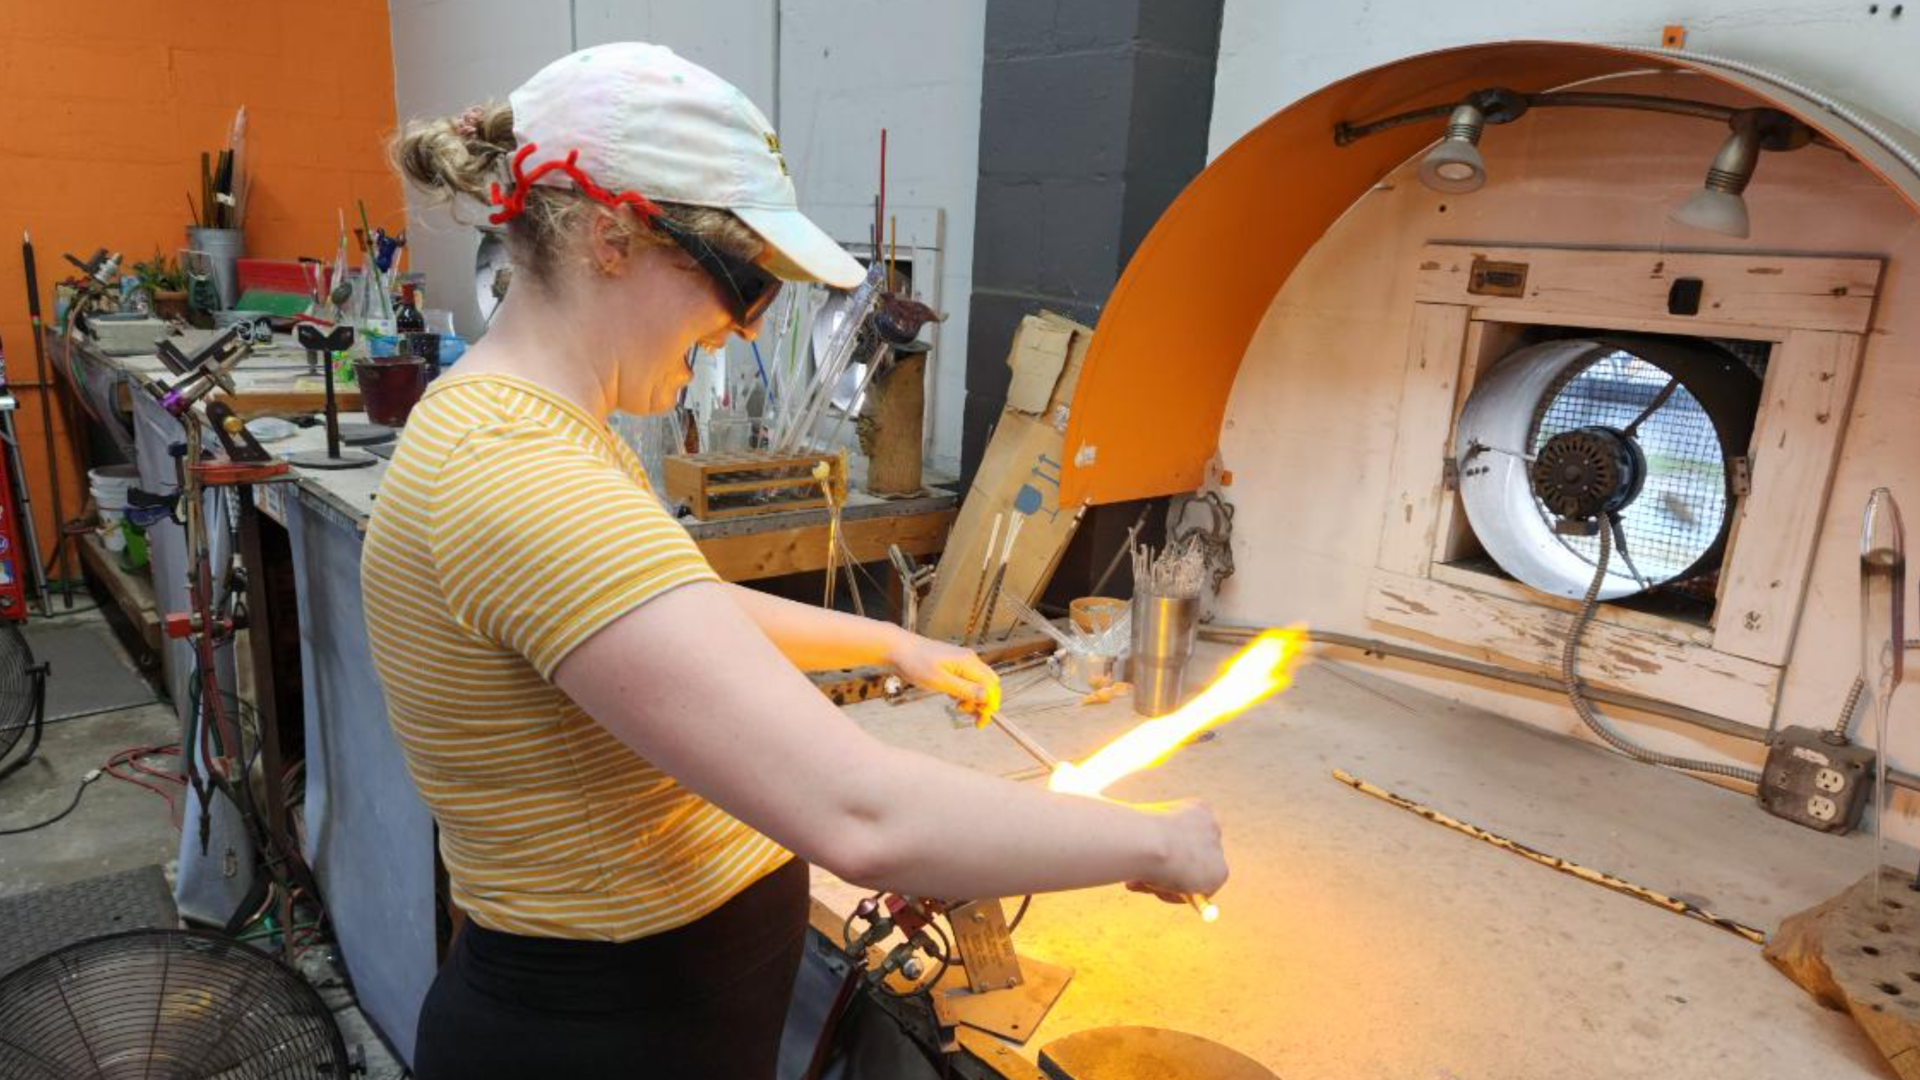 A woman in a yellow top and tie-dye baseball gap melts tubes of glass over an open flame.